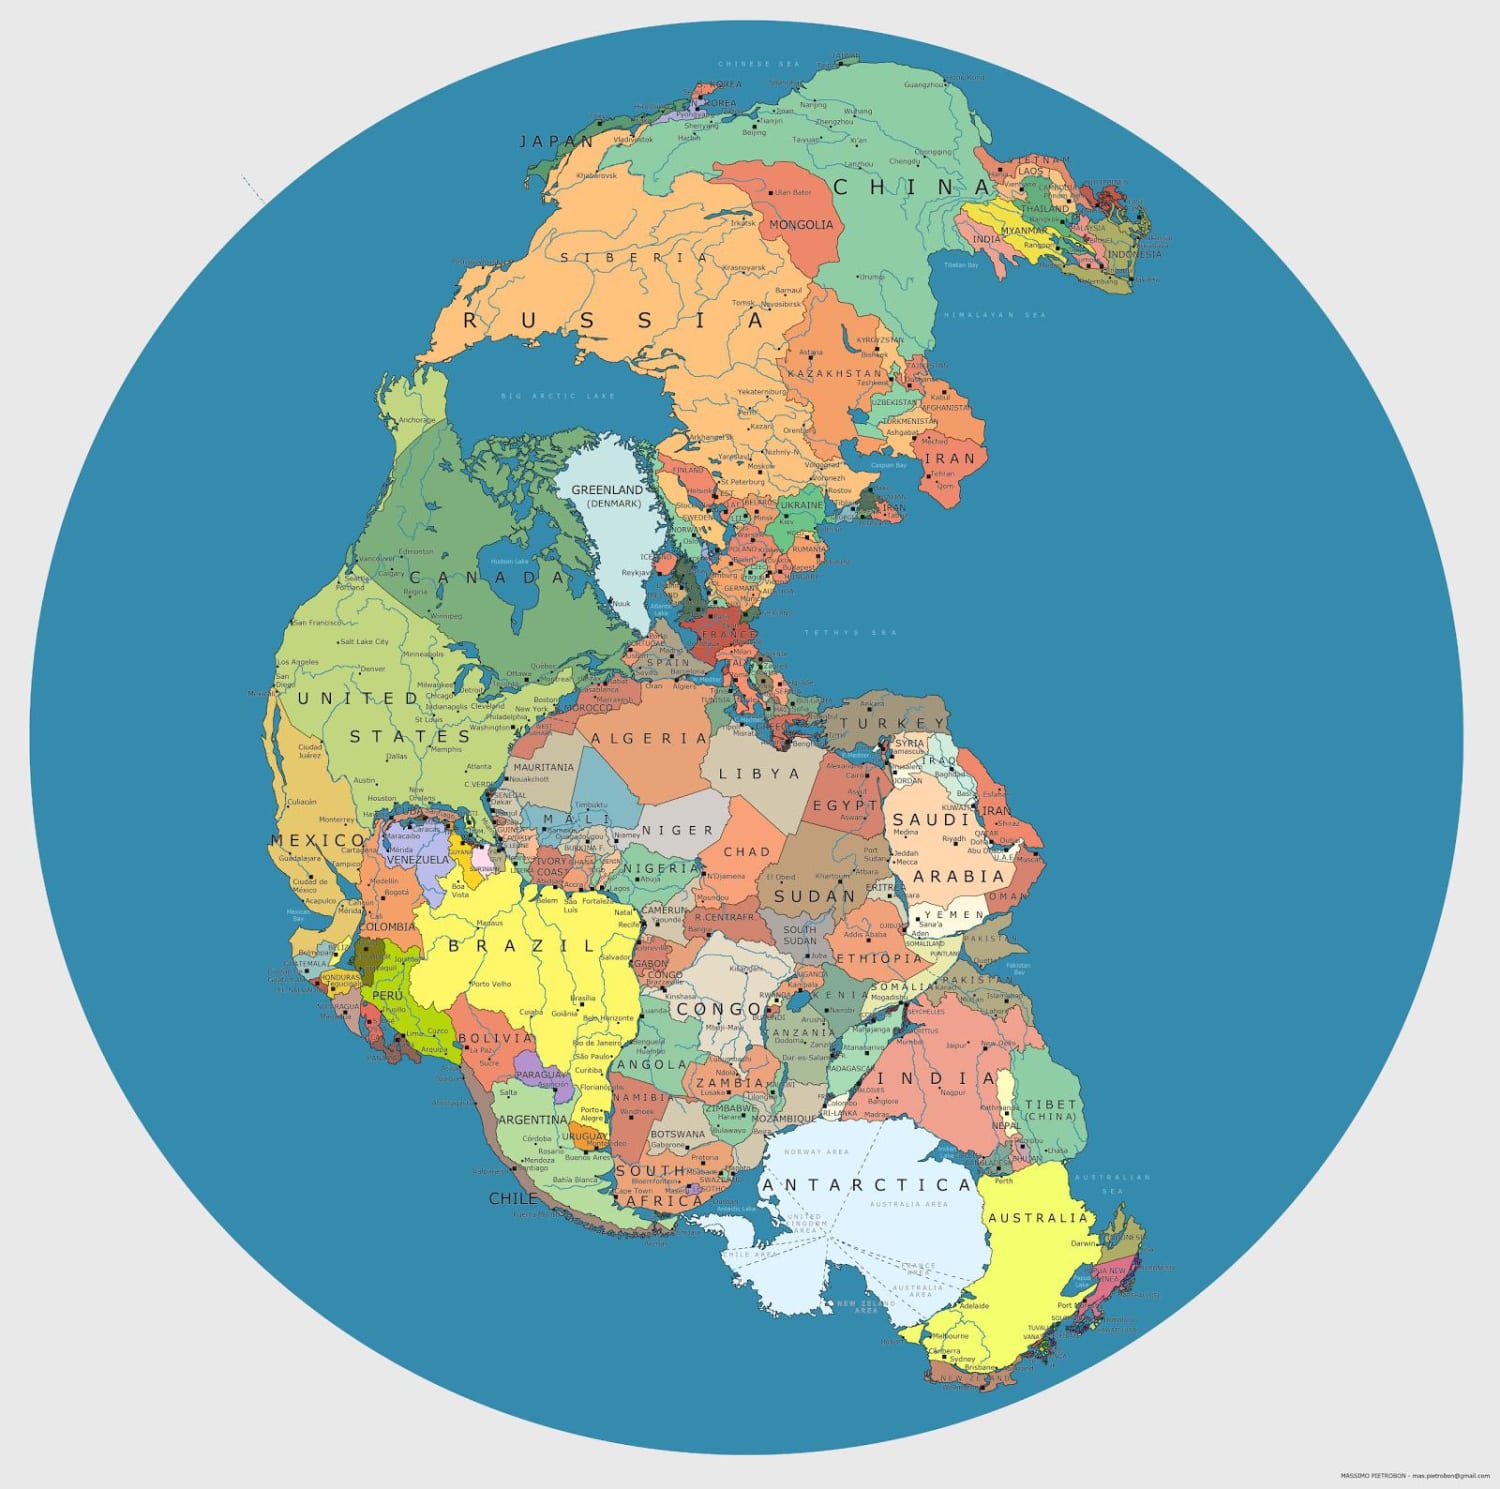 Map of Pangea with modern-day borders